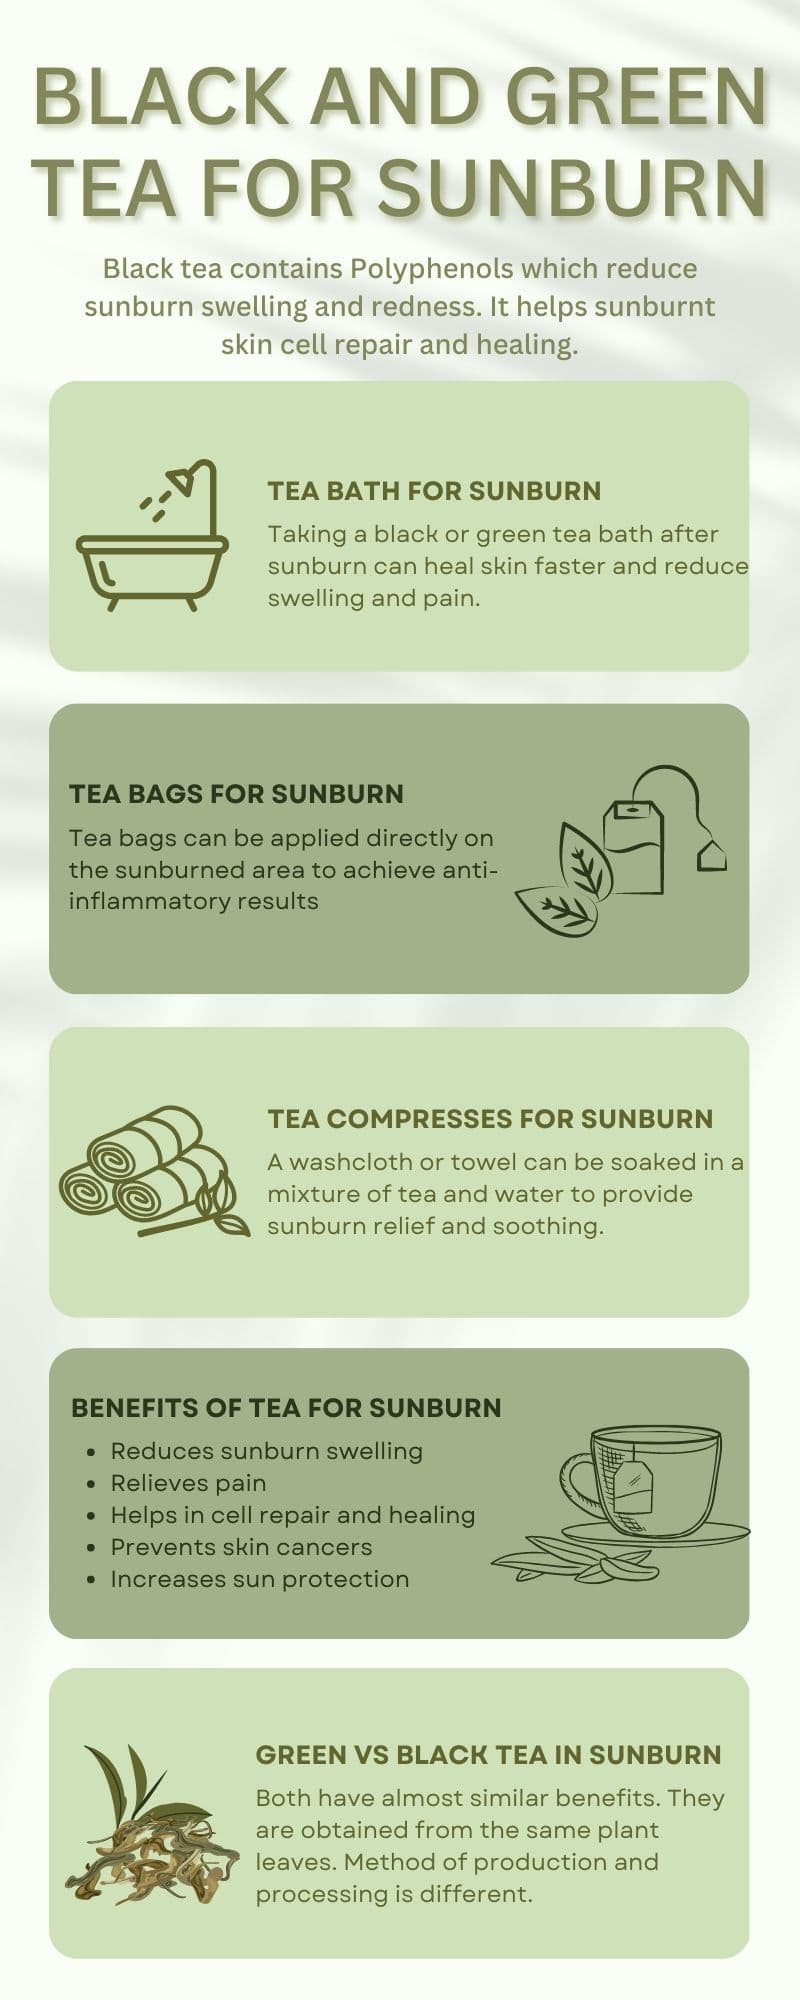 Infographic-Tips on how to use Black-and-Green-Tea-for-Sunburn